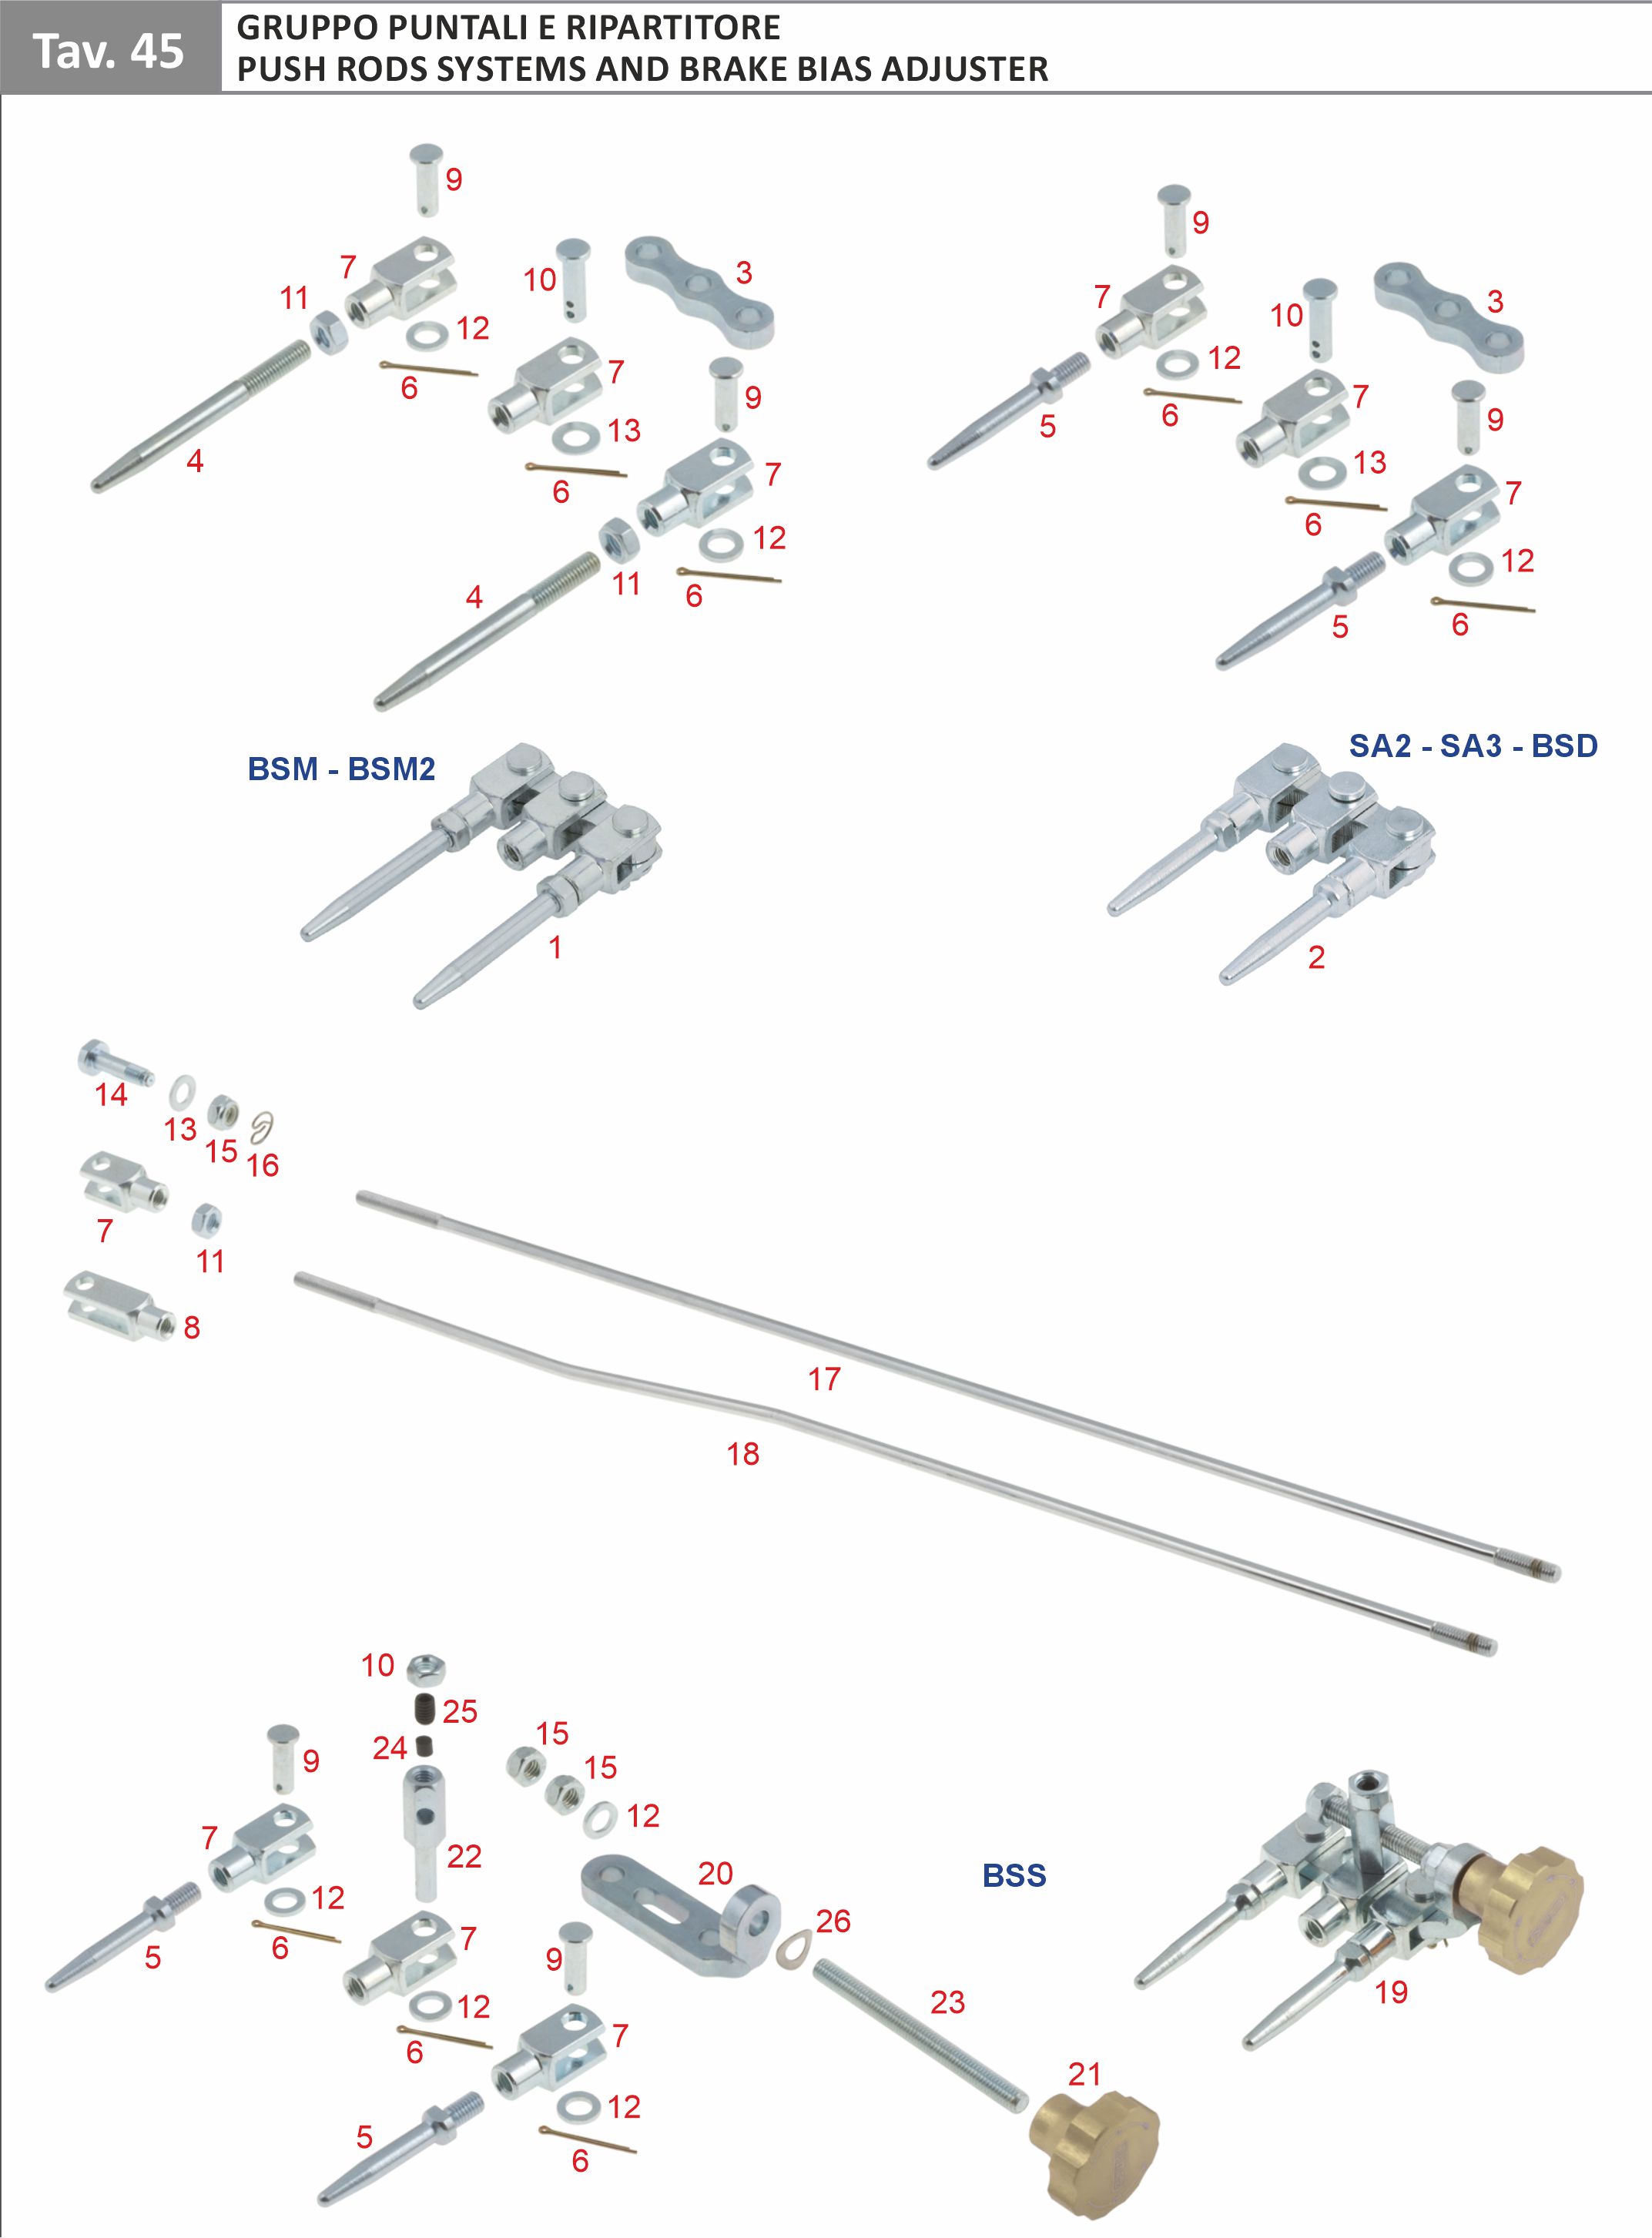 Picture for category push rods systems and brake bias adjuster